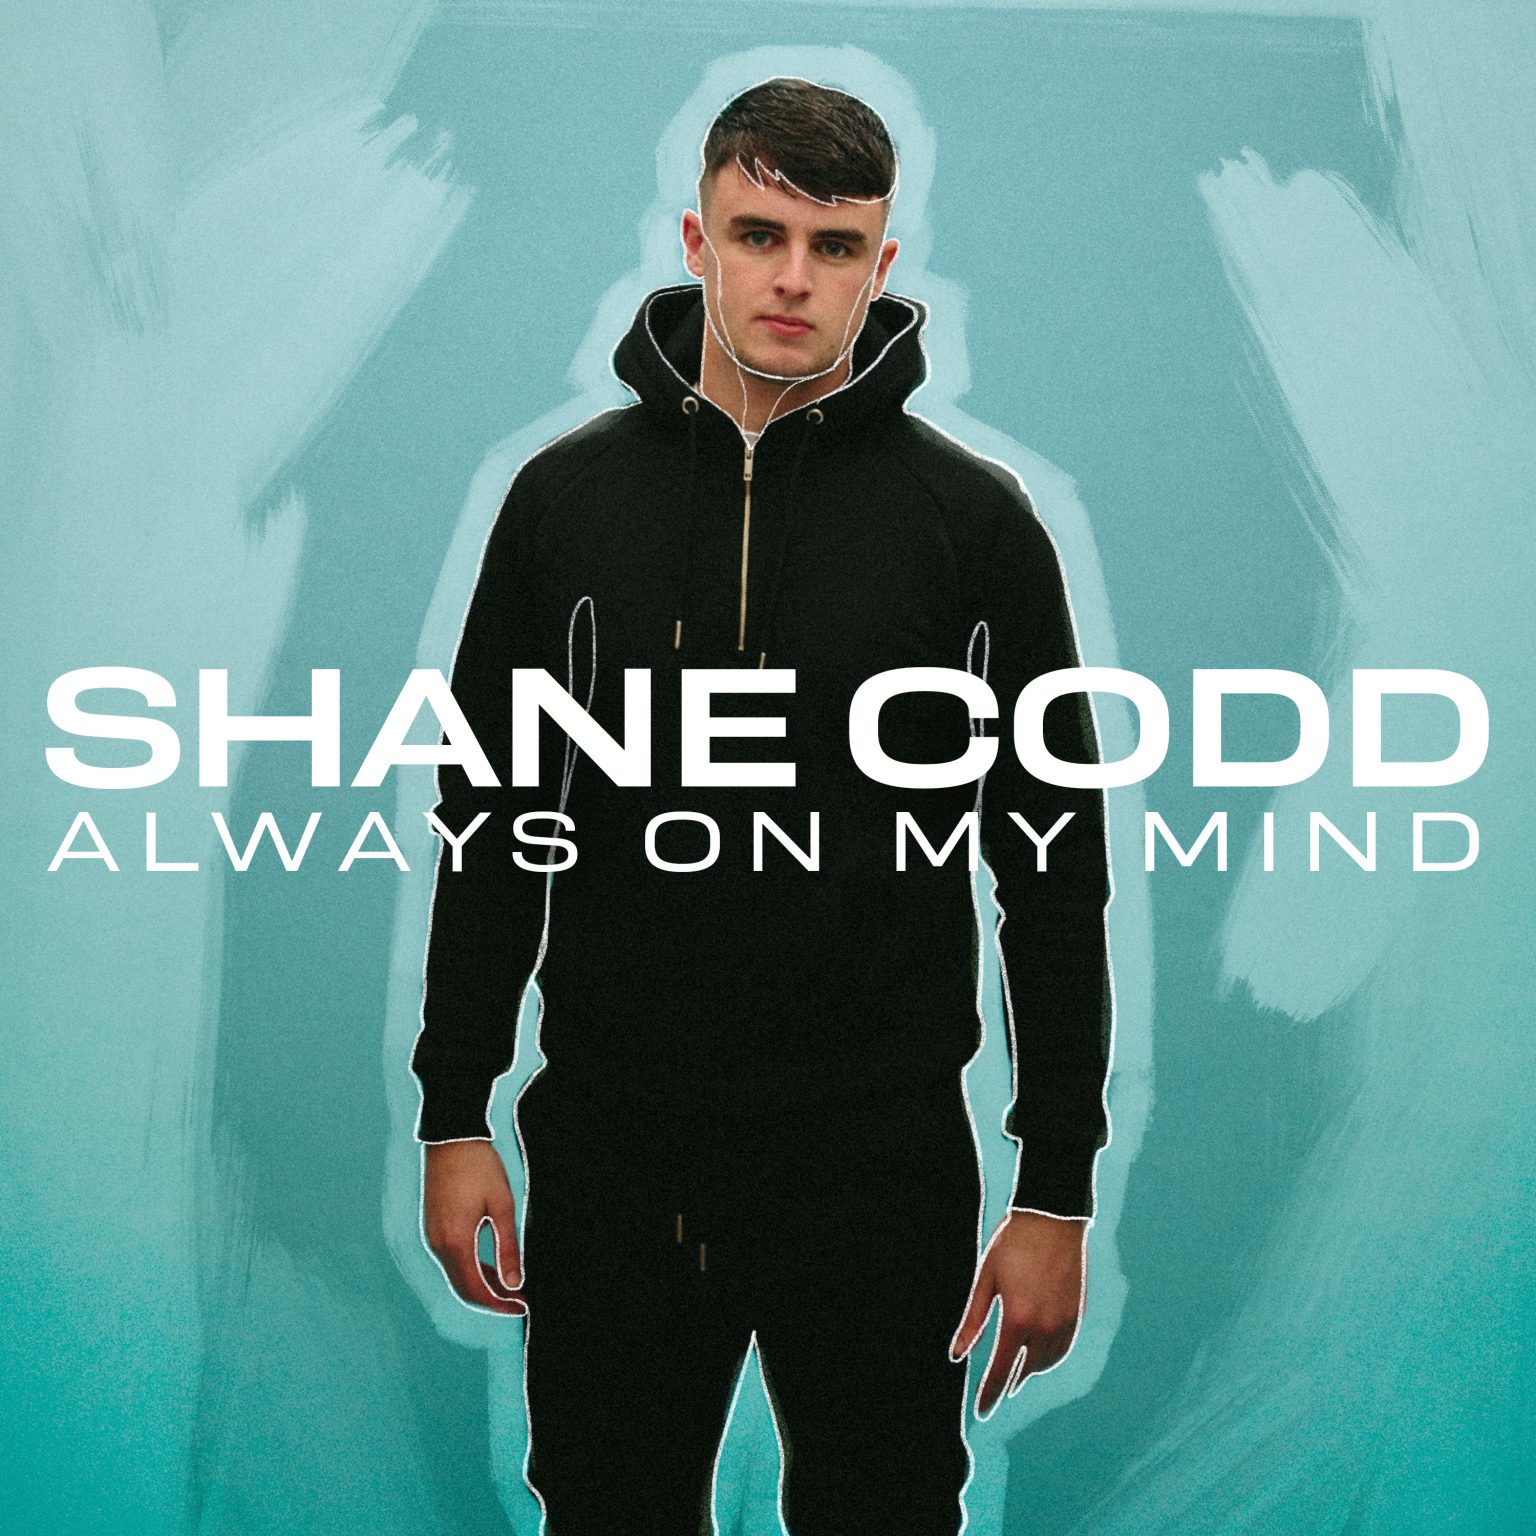 Shane Codd featuring Charlotte Haining — Always On My Mind cover artwork